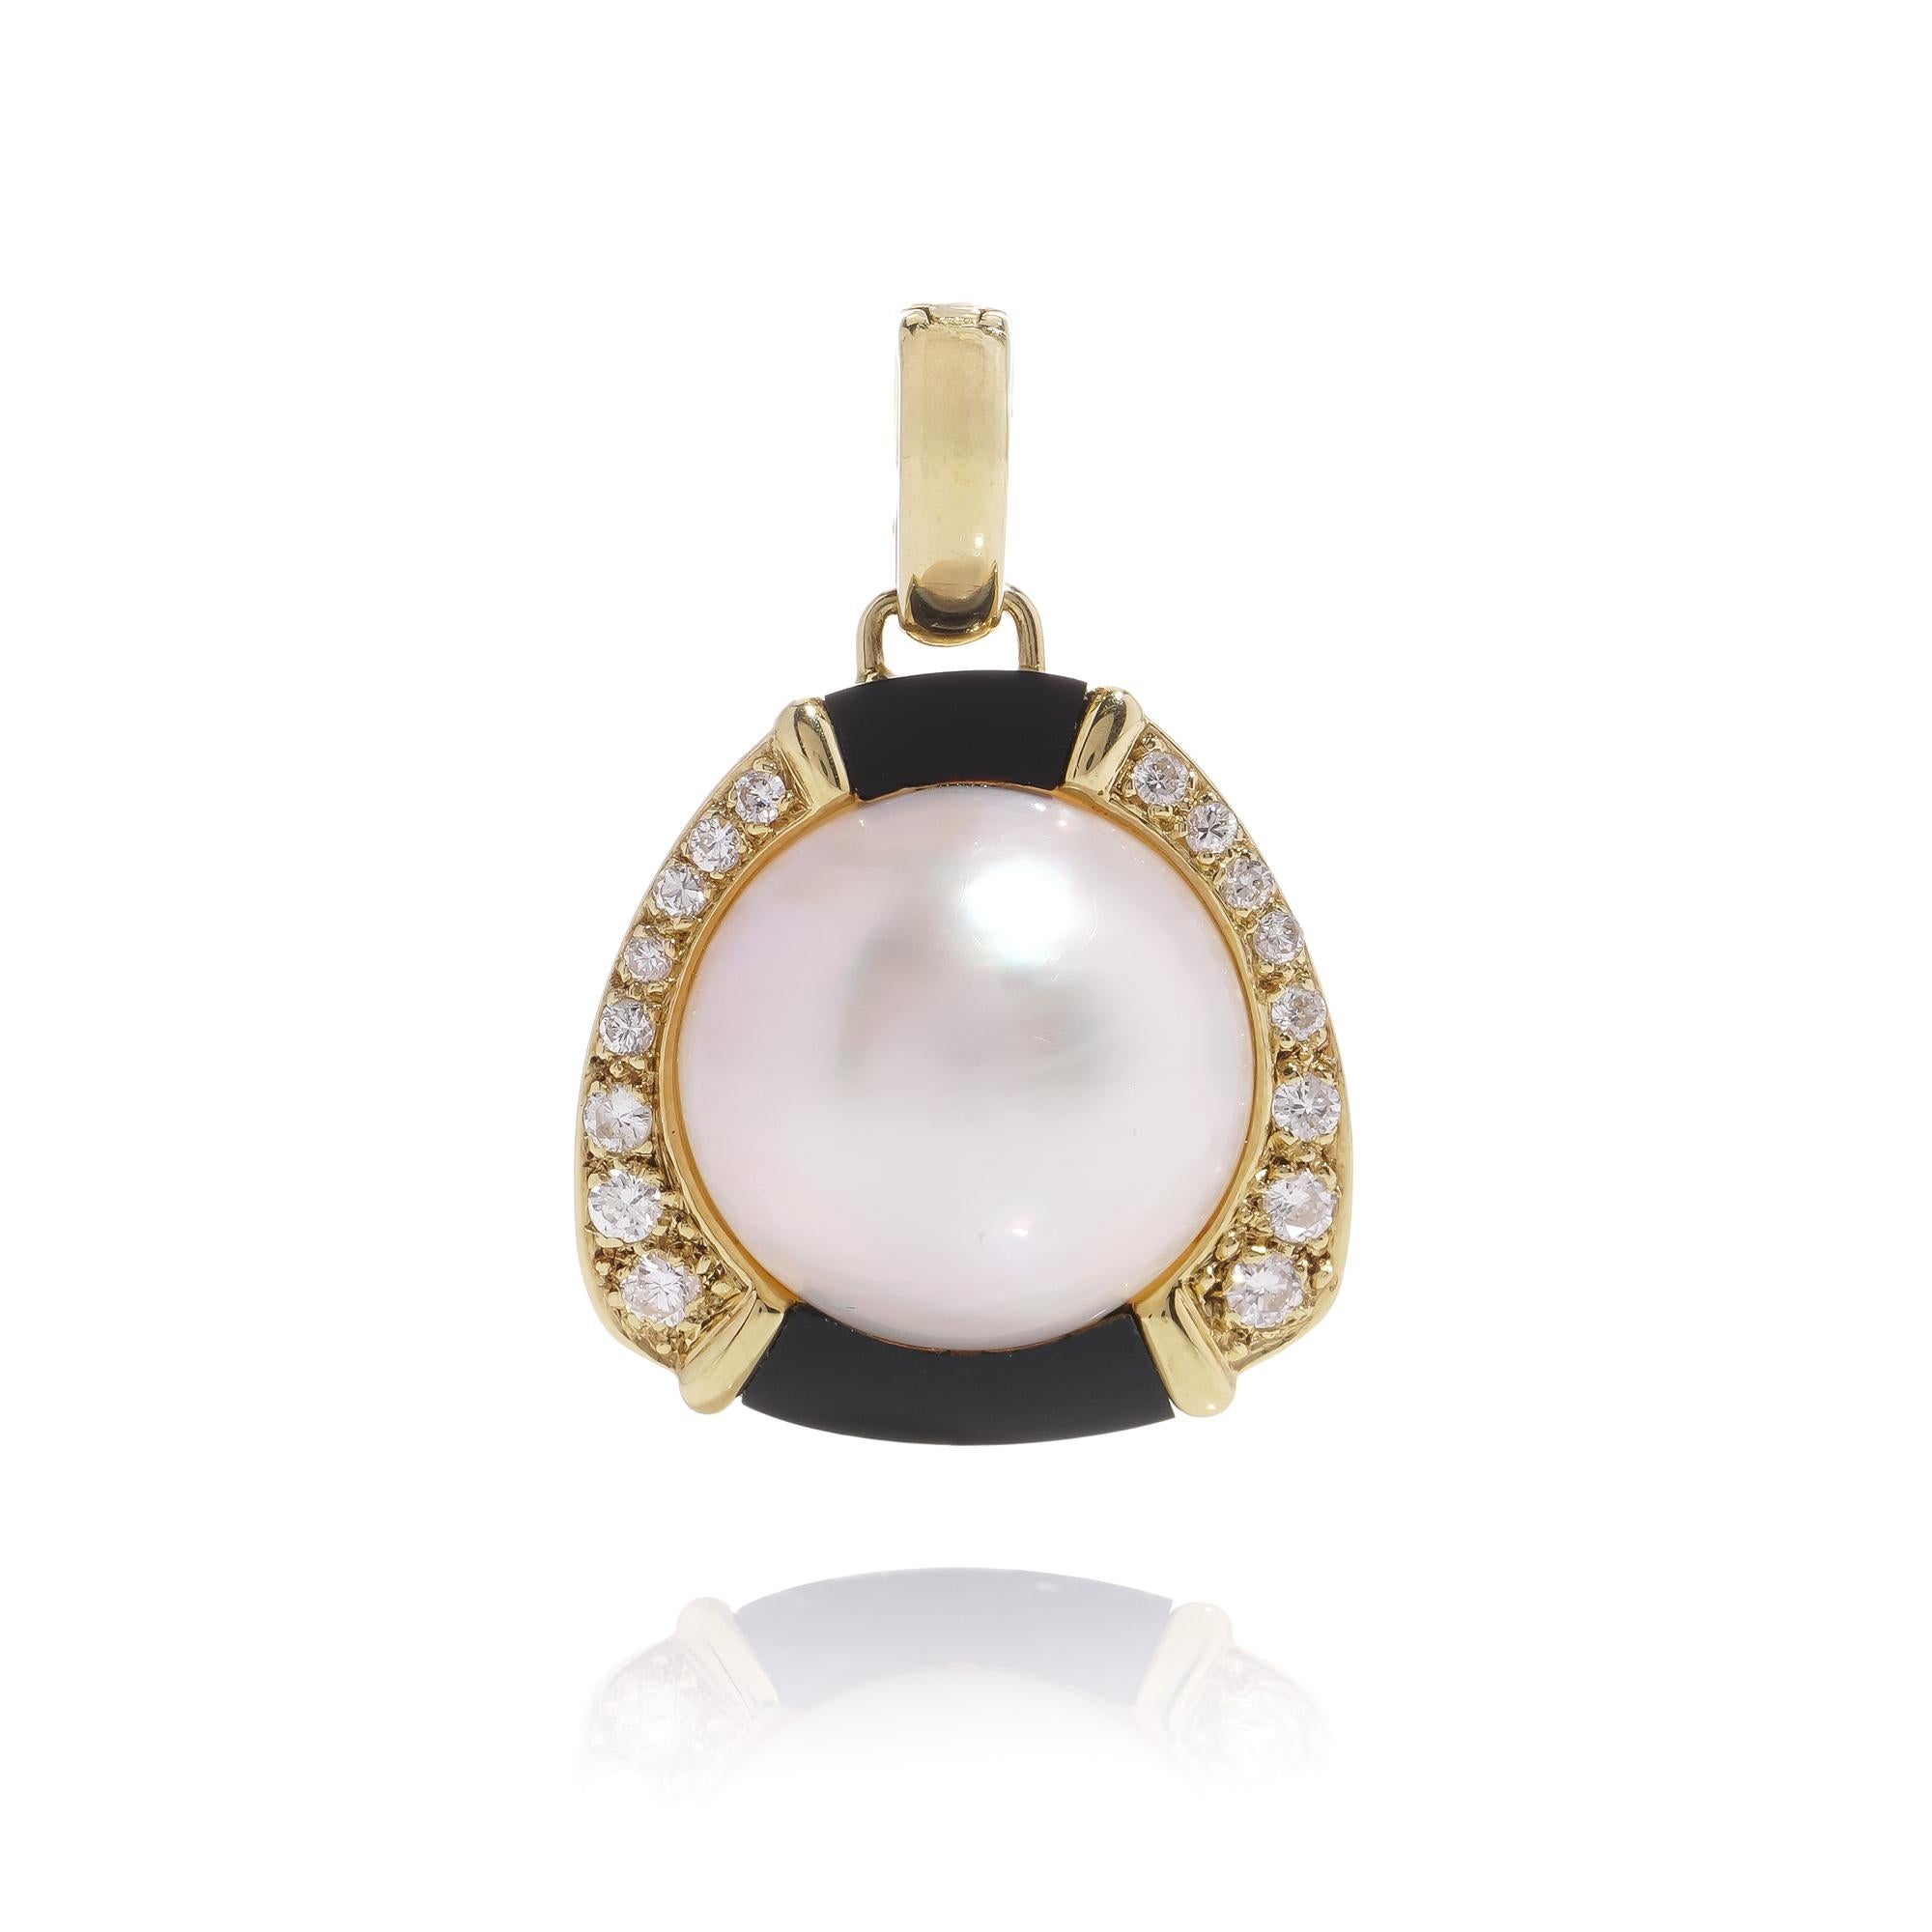 18kt yellow gold pendant with cultured half of Akoya pearl, onyx, and 0.50 carats of round brilliant diamonds. 
Hallmarked for 18kt gold. 

Dimensions -
Length x width x depth: 3 x 2 x 1 cm 
Weight: 7.03 grams

Akoya pearl size:
95mm in